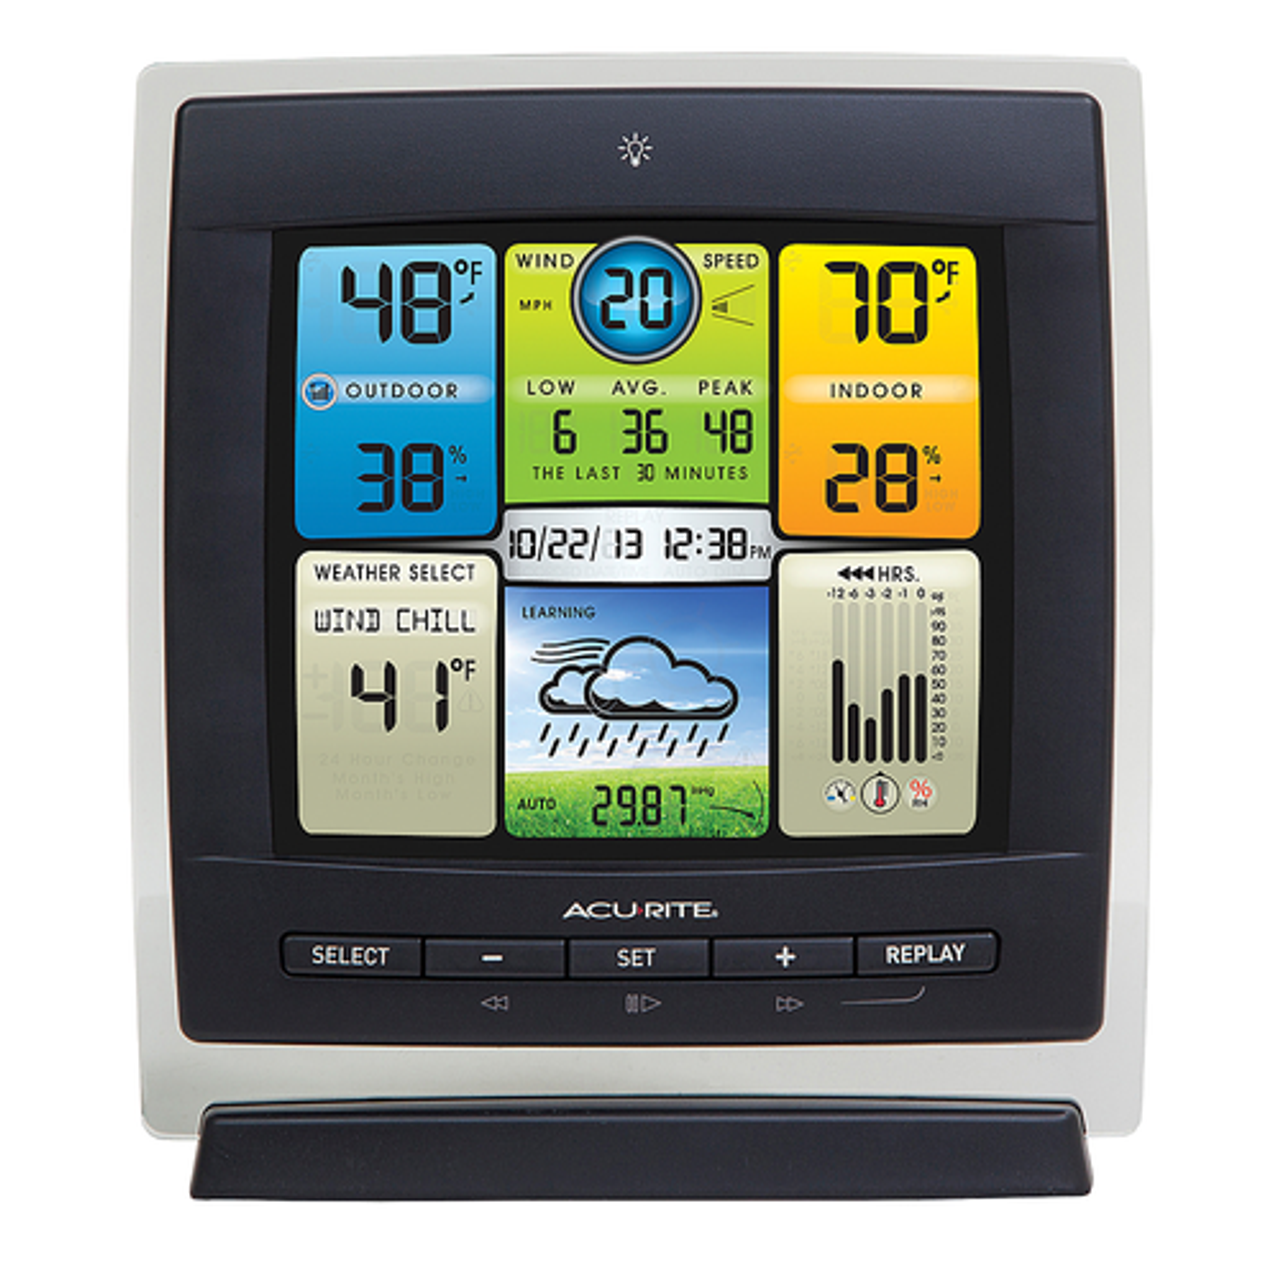 AcuRite Notos Weather Station with Digital Color Display for Hyperlocal Forecasting